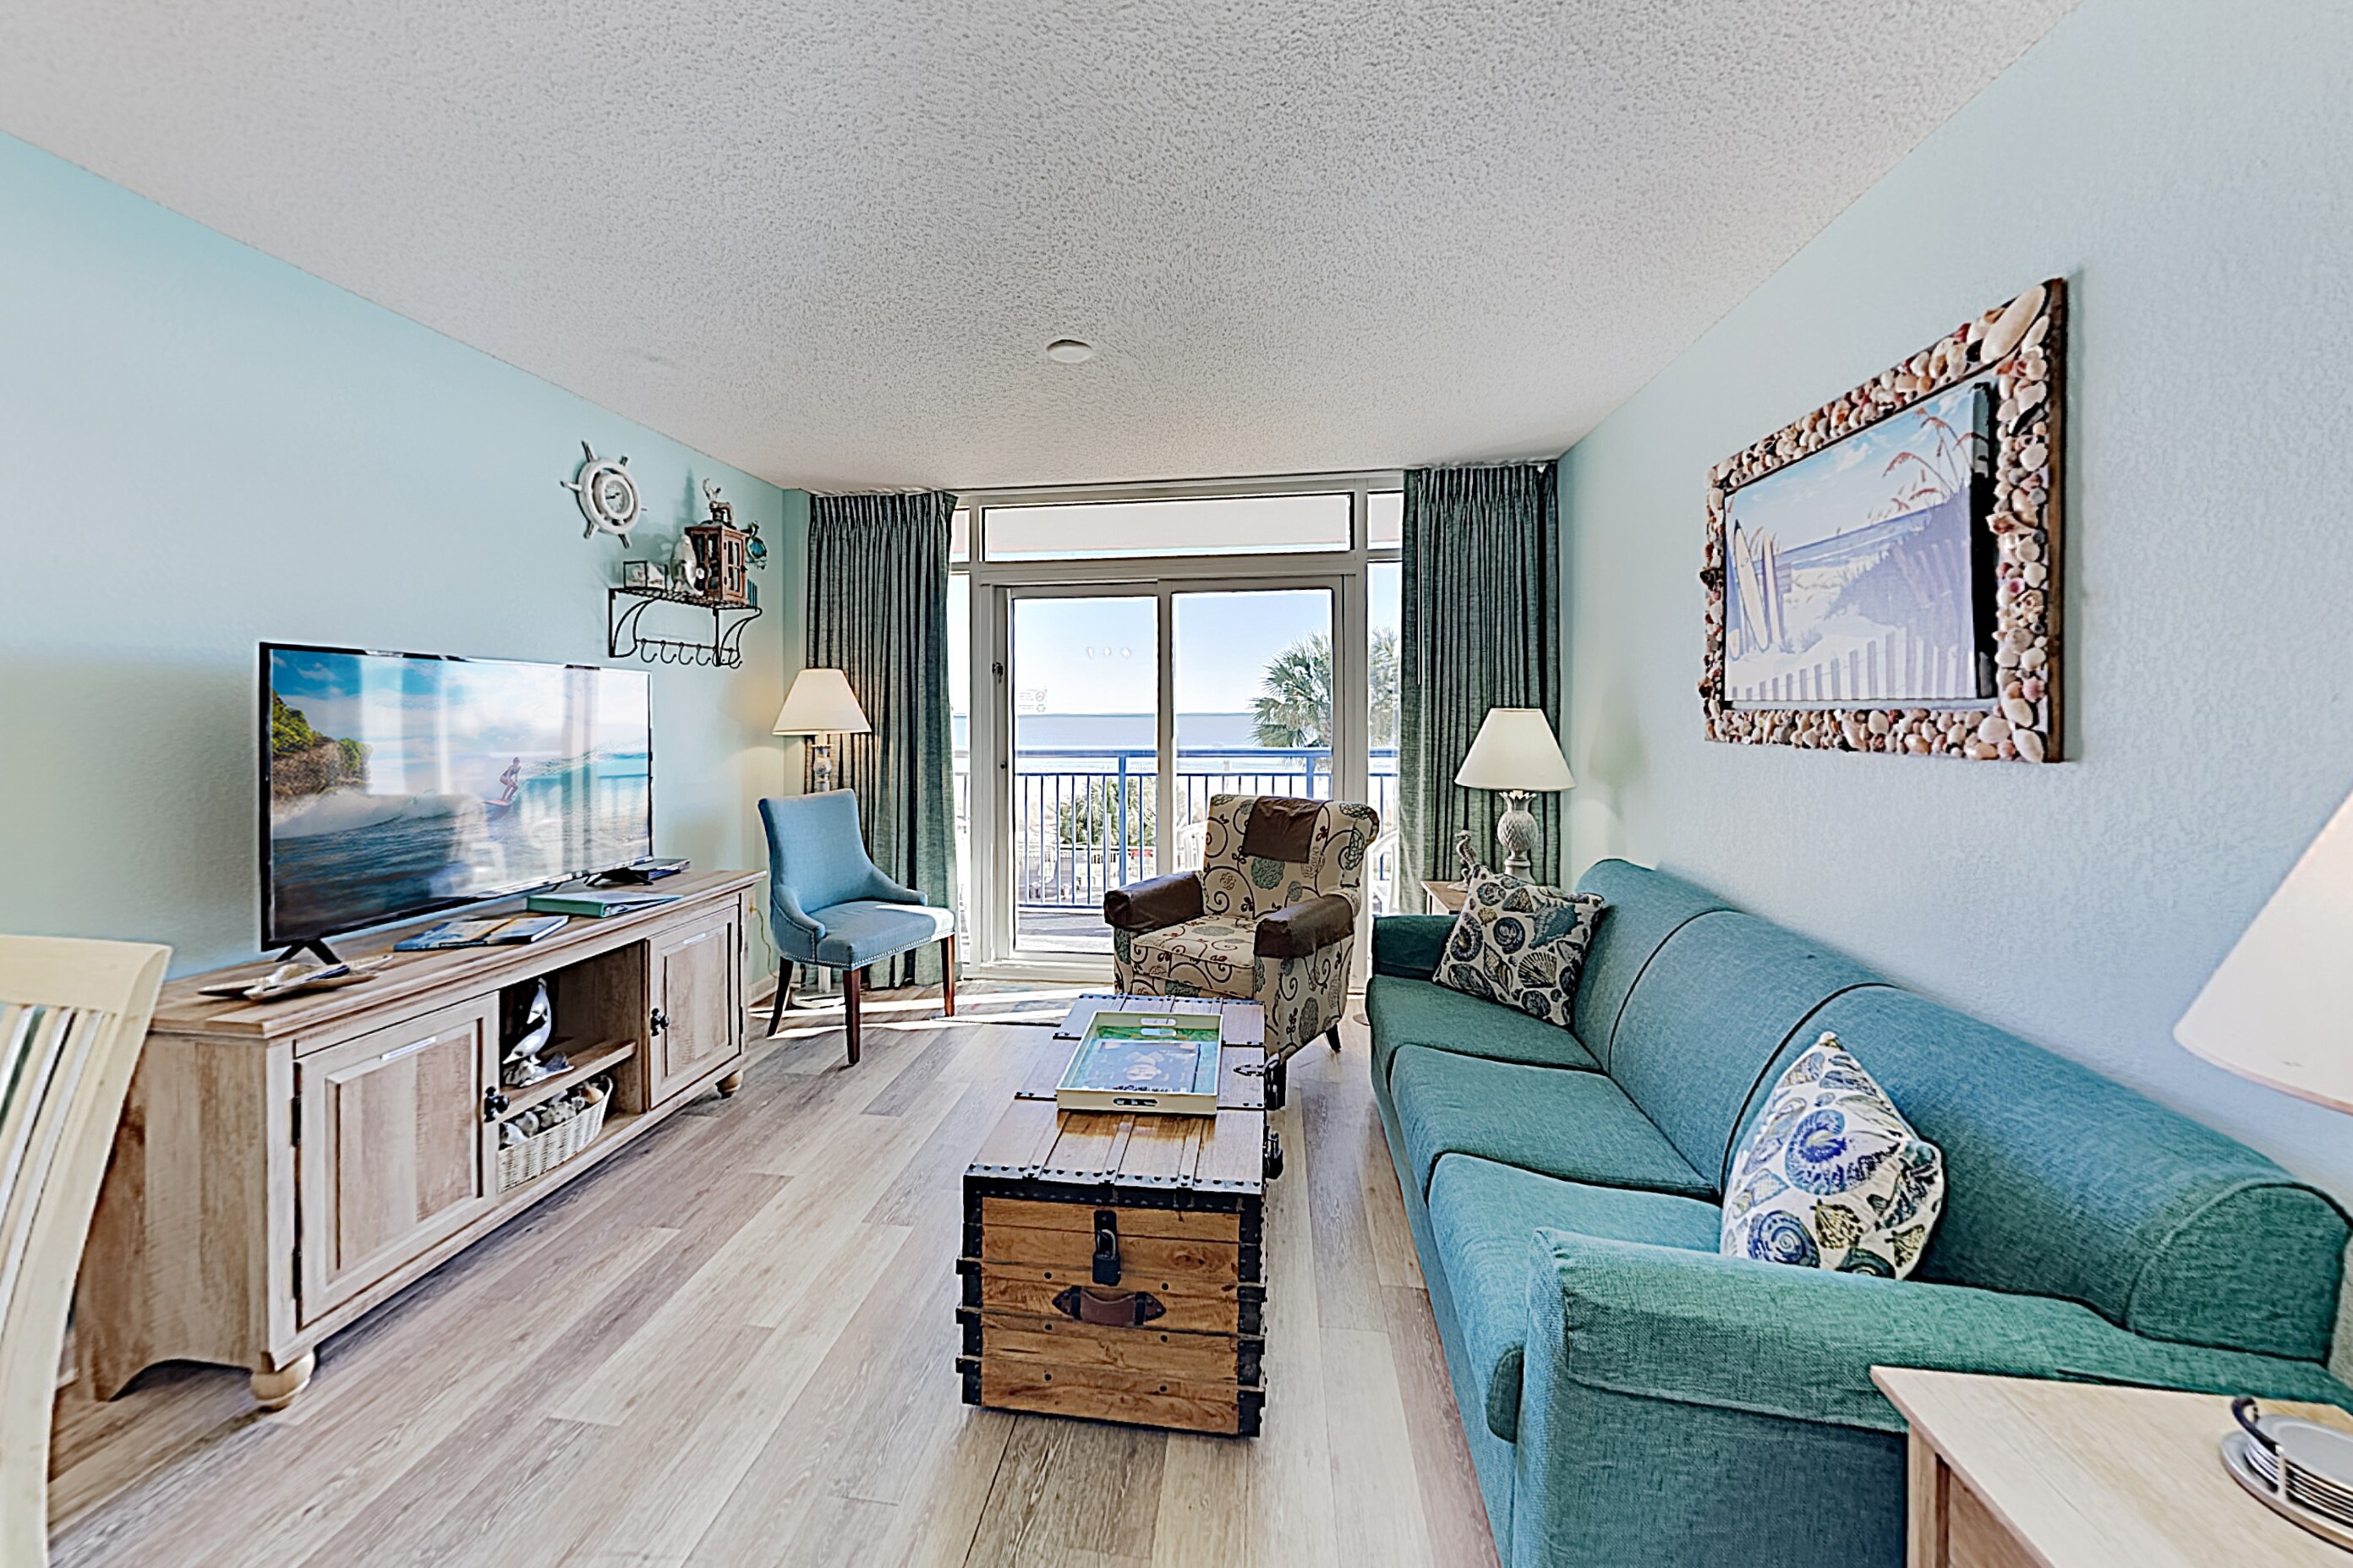 Welcome to Myrtle Beach! This condo is professionally managed by TurnKey Vacation Rentals.